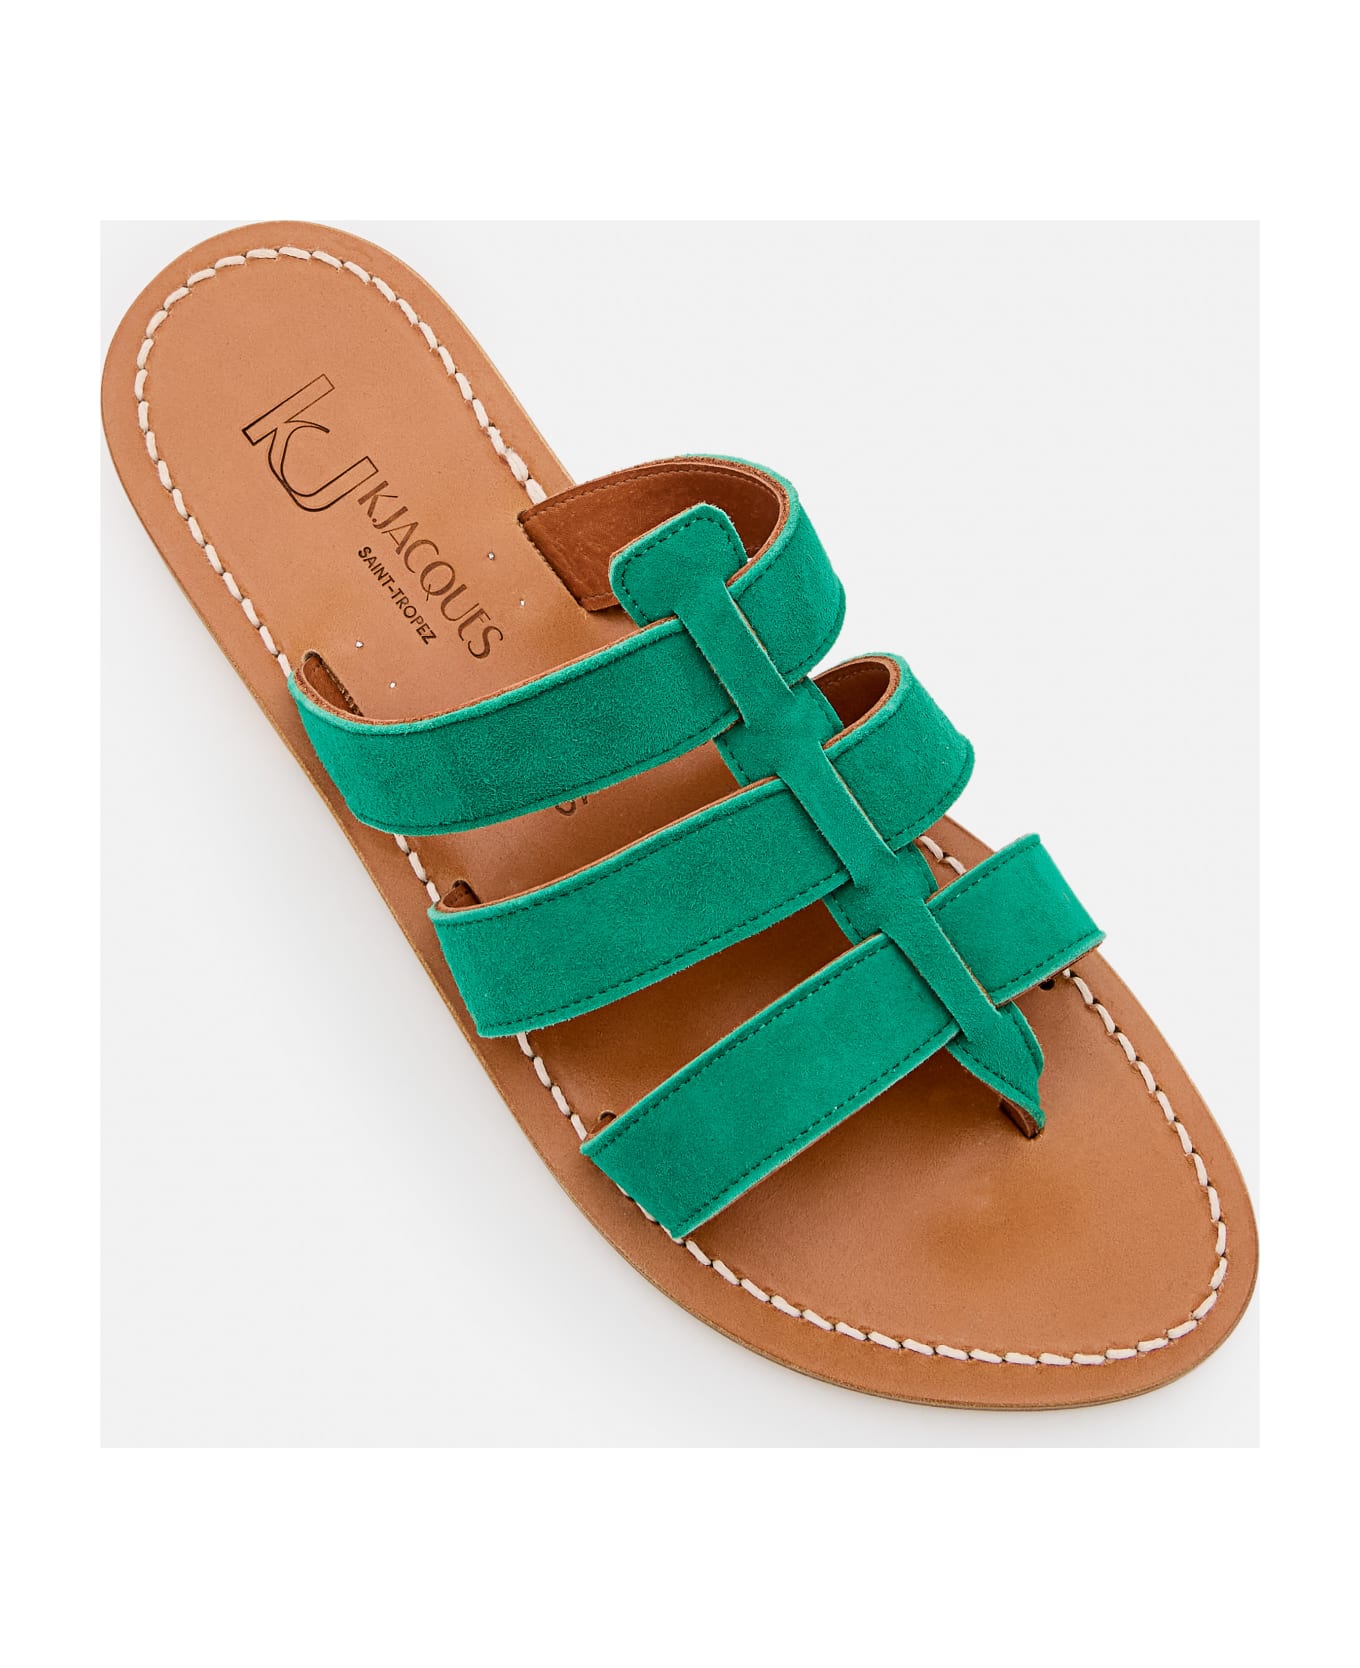 K.Jacques Dolon Leather Sandals - Green サンダル